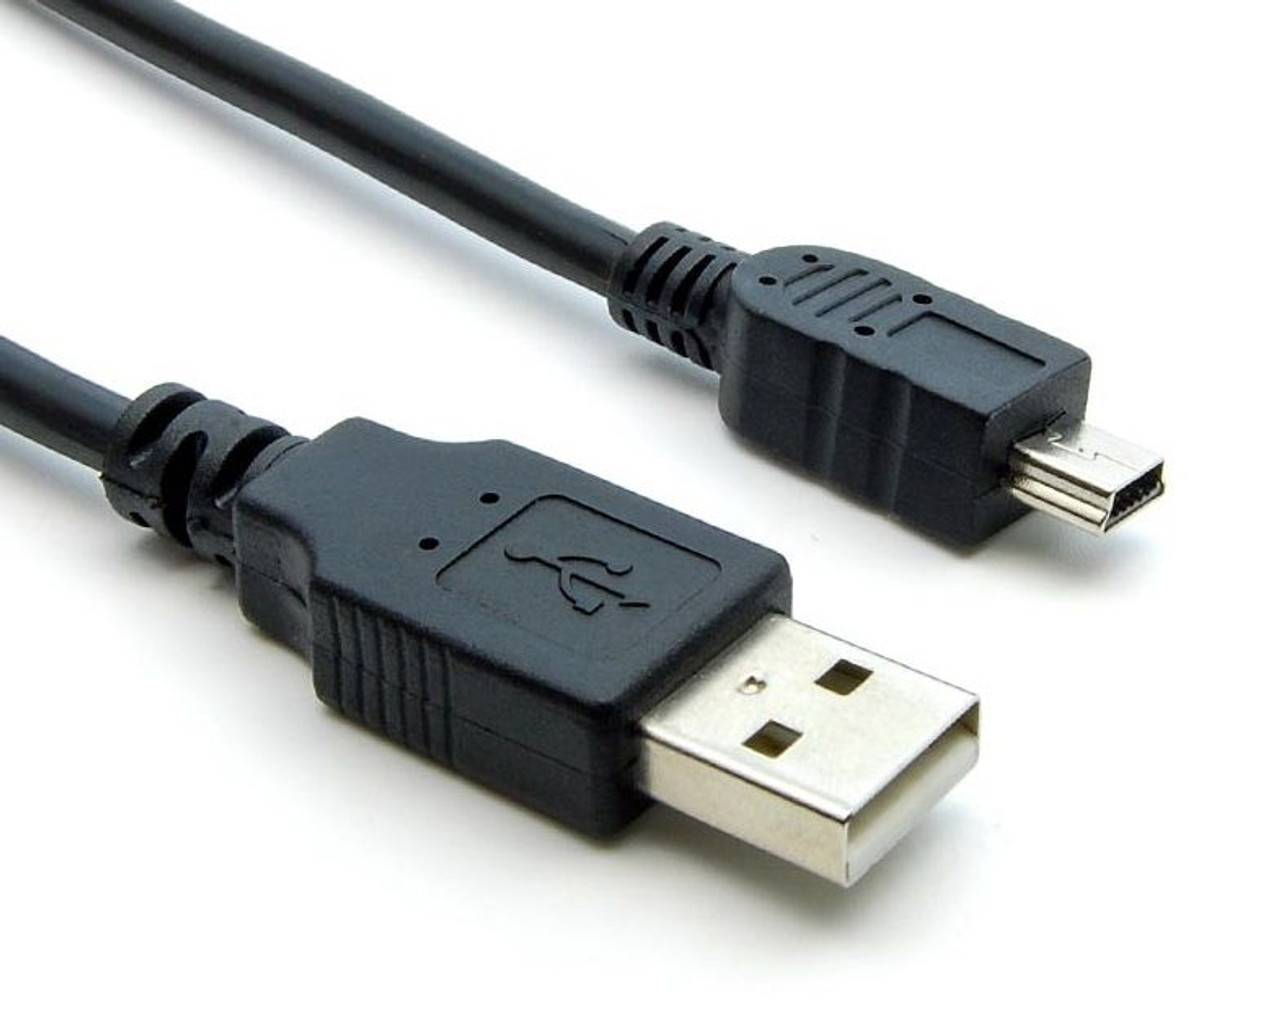 3 ft USB to Right Angle Mini USB Cable - Mini USB Cables & Adapters, Cables